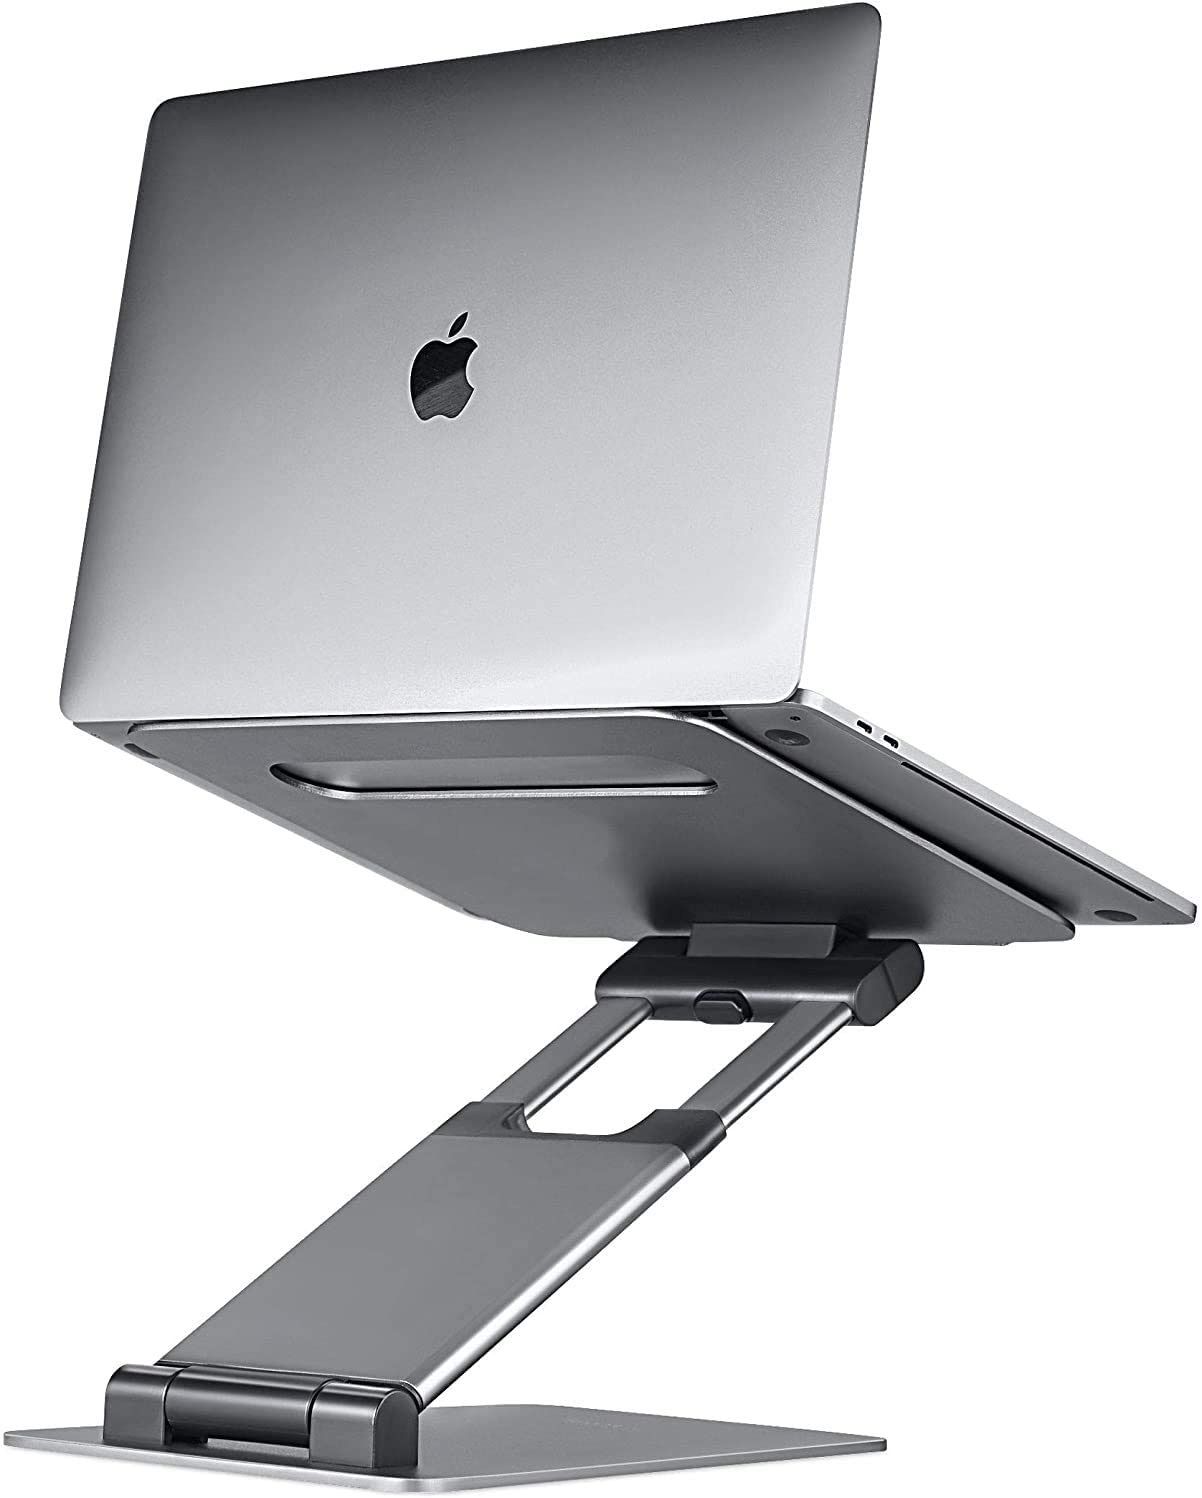 A half-extended Lifelong Upryze laptop stand with an Apple Mac laptop on it